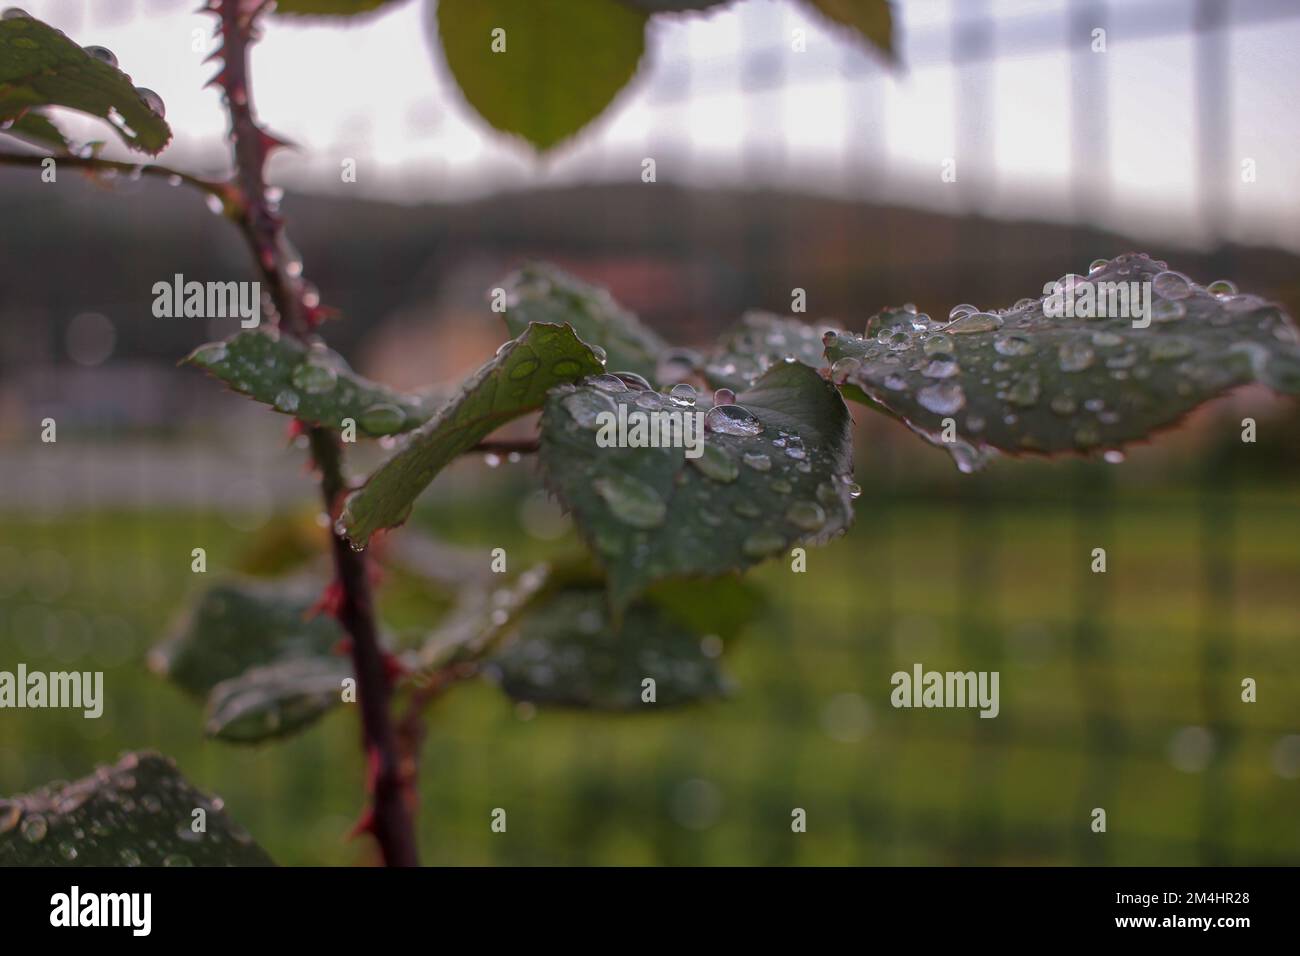 rain in Galicia leaves drops of water on leaves Stock Photo